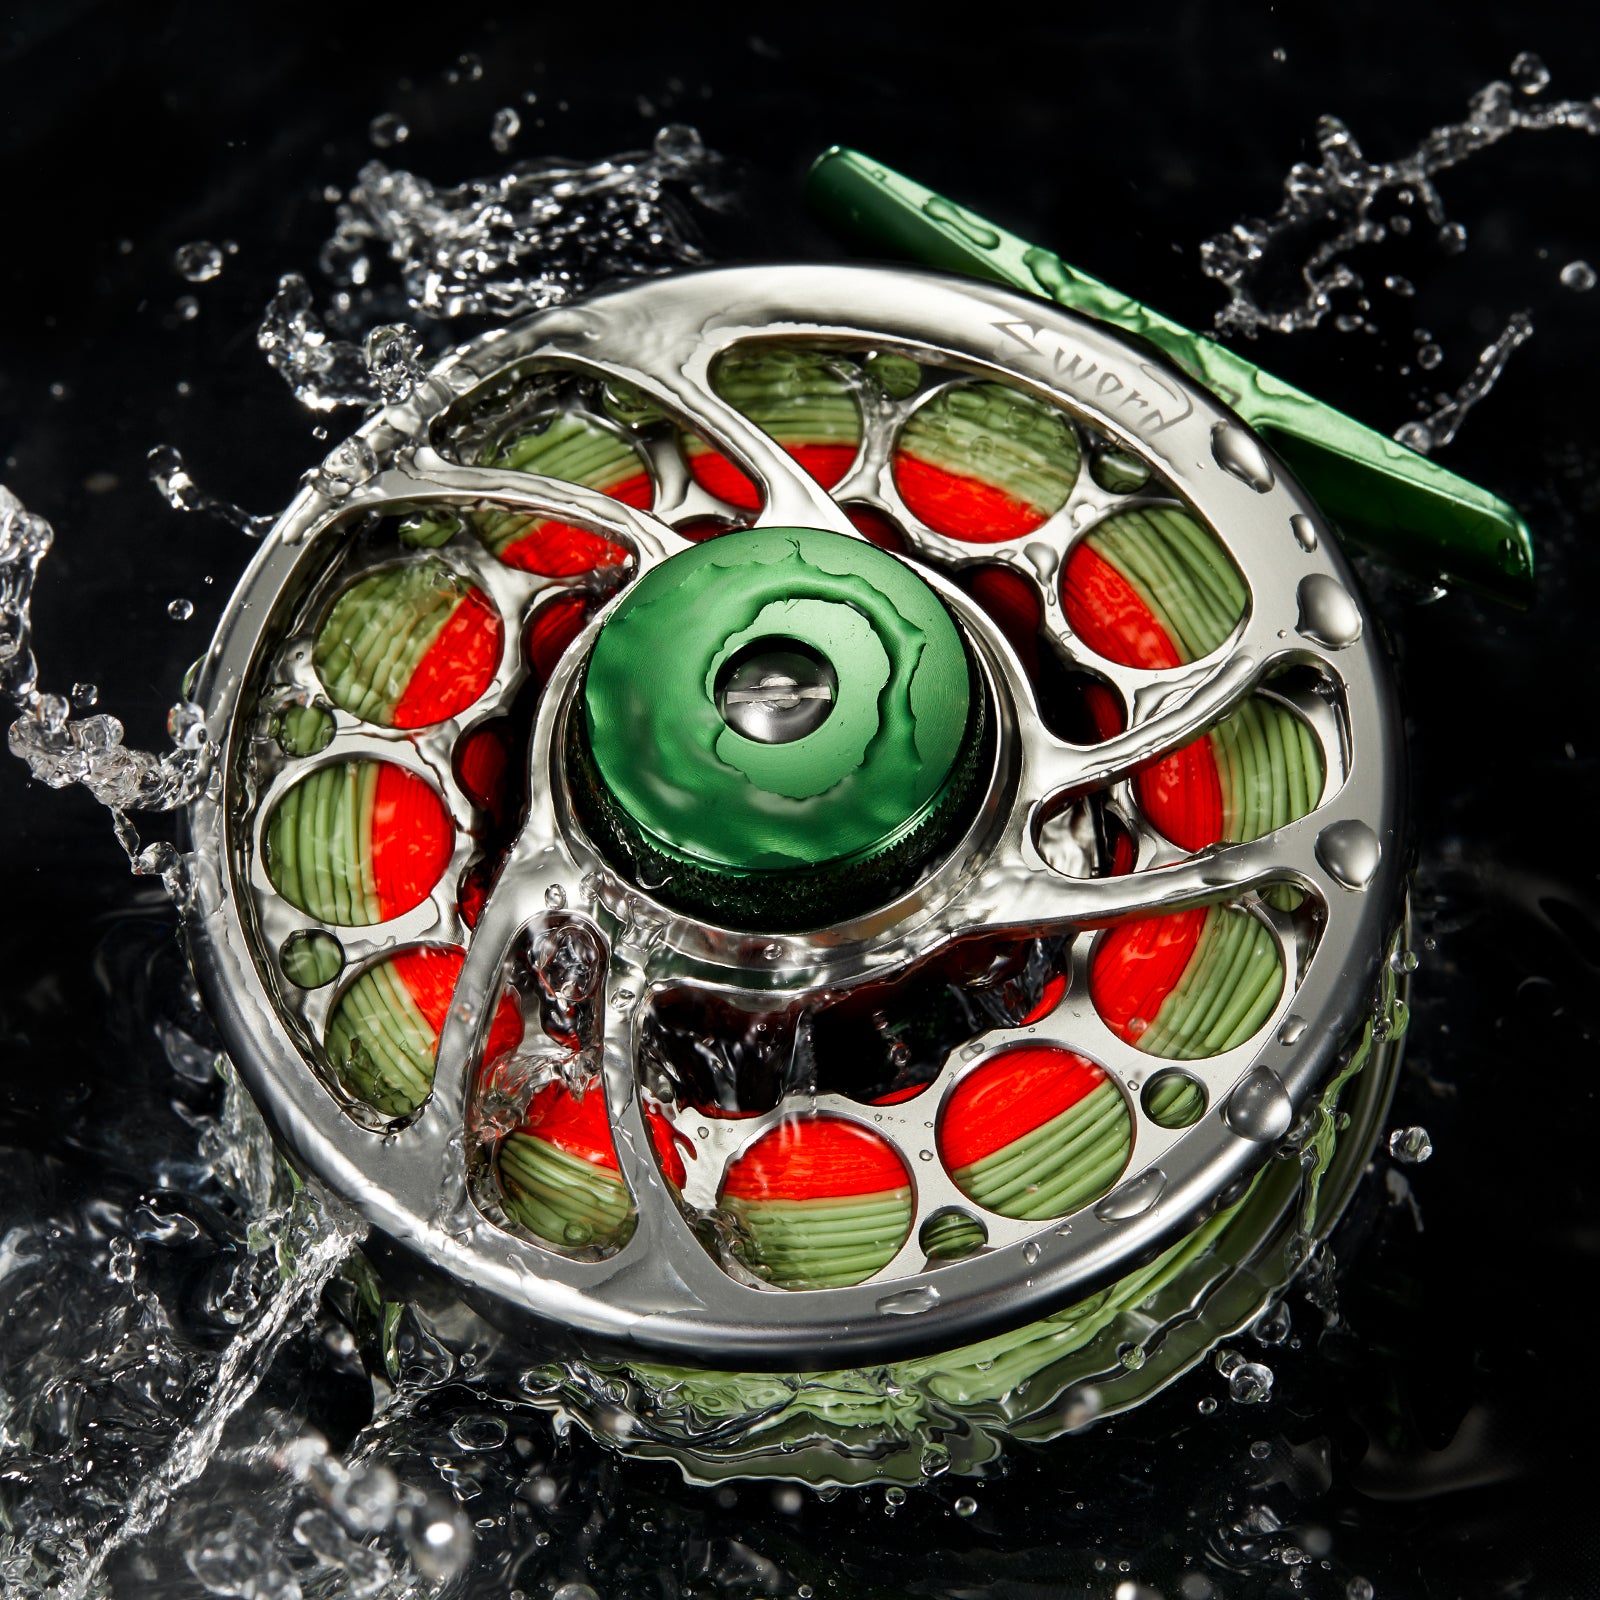 Piscifun Sword Fly Reel with CNC-machined Aluminium Material  3/4/5/6/7/8/9/10 WT Right Left Handed Fly Fishing Reel Gunmetal - AliExpress